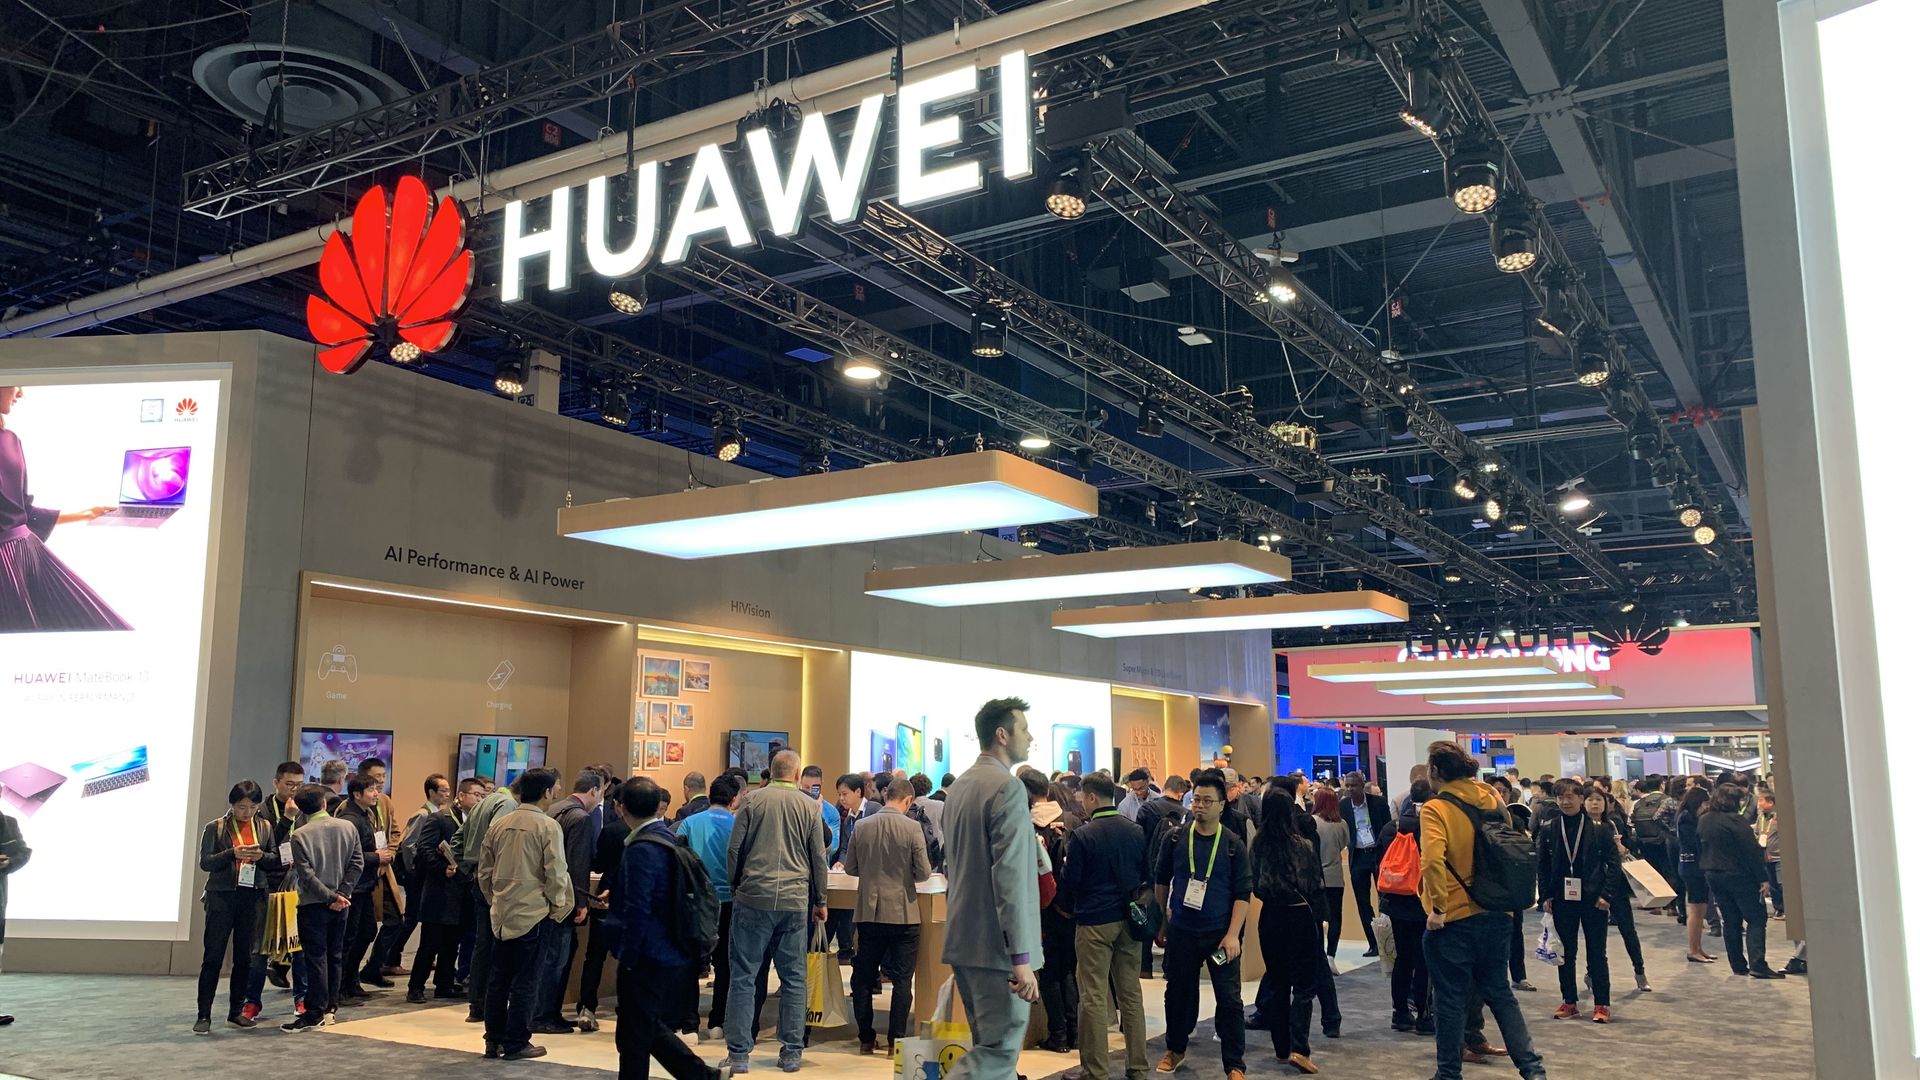 Huawei's CES booth